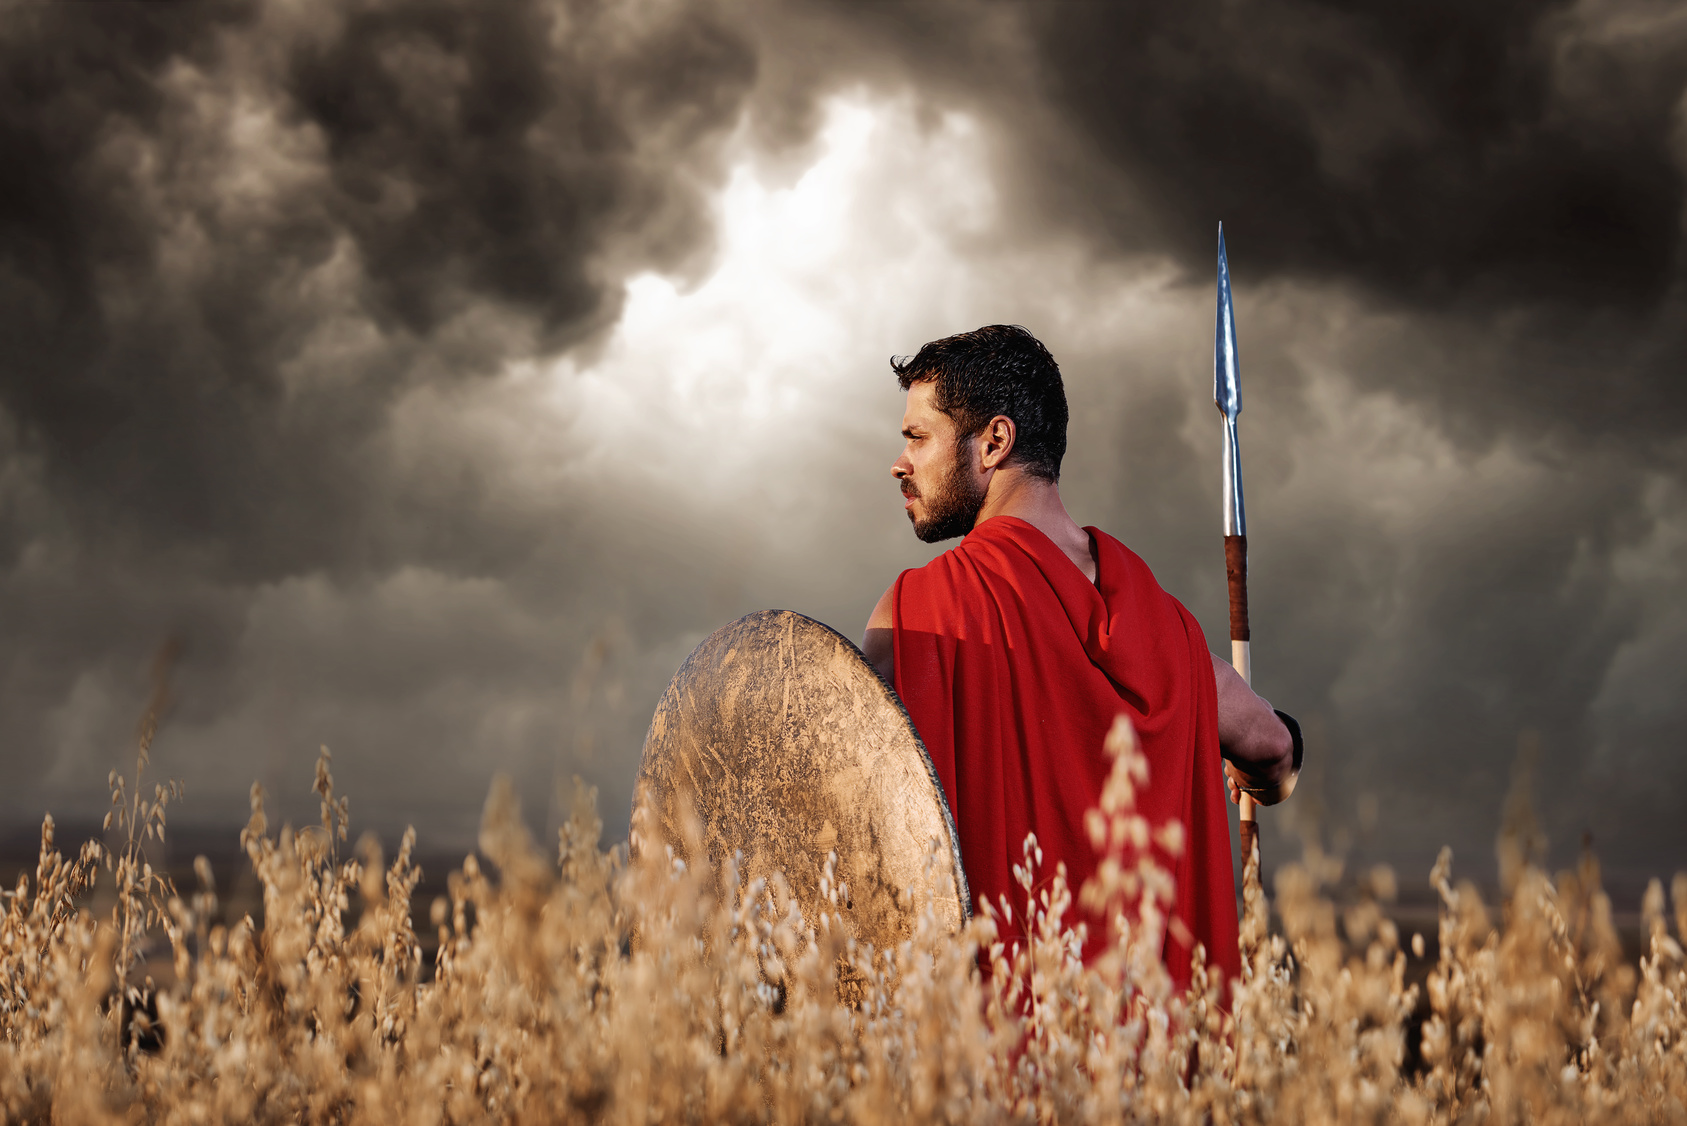 Back view of warrior wearing in red cloak like spartan or antique roman solider turned back and looking away. Brunet with beard holding sword and shield going in attack. Bad weather with dark clouds.